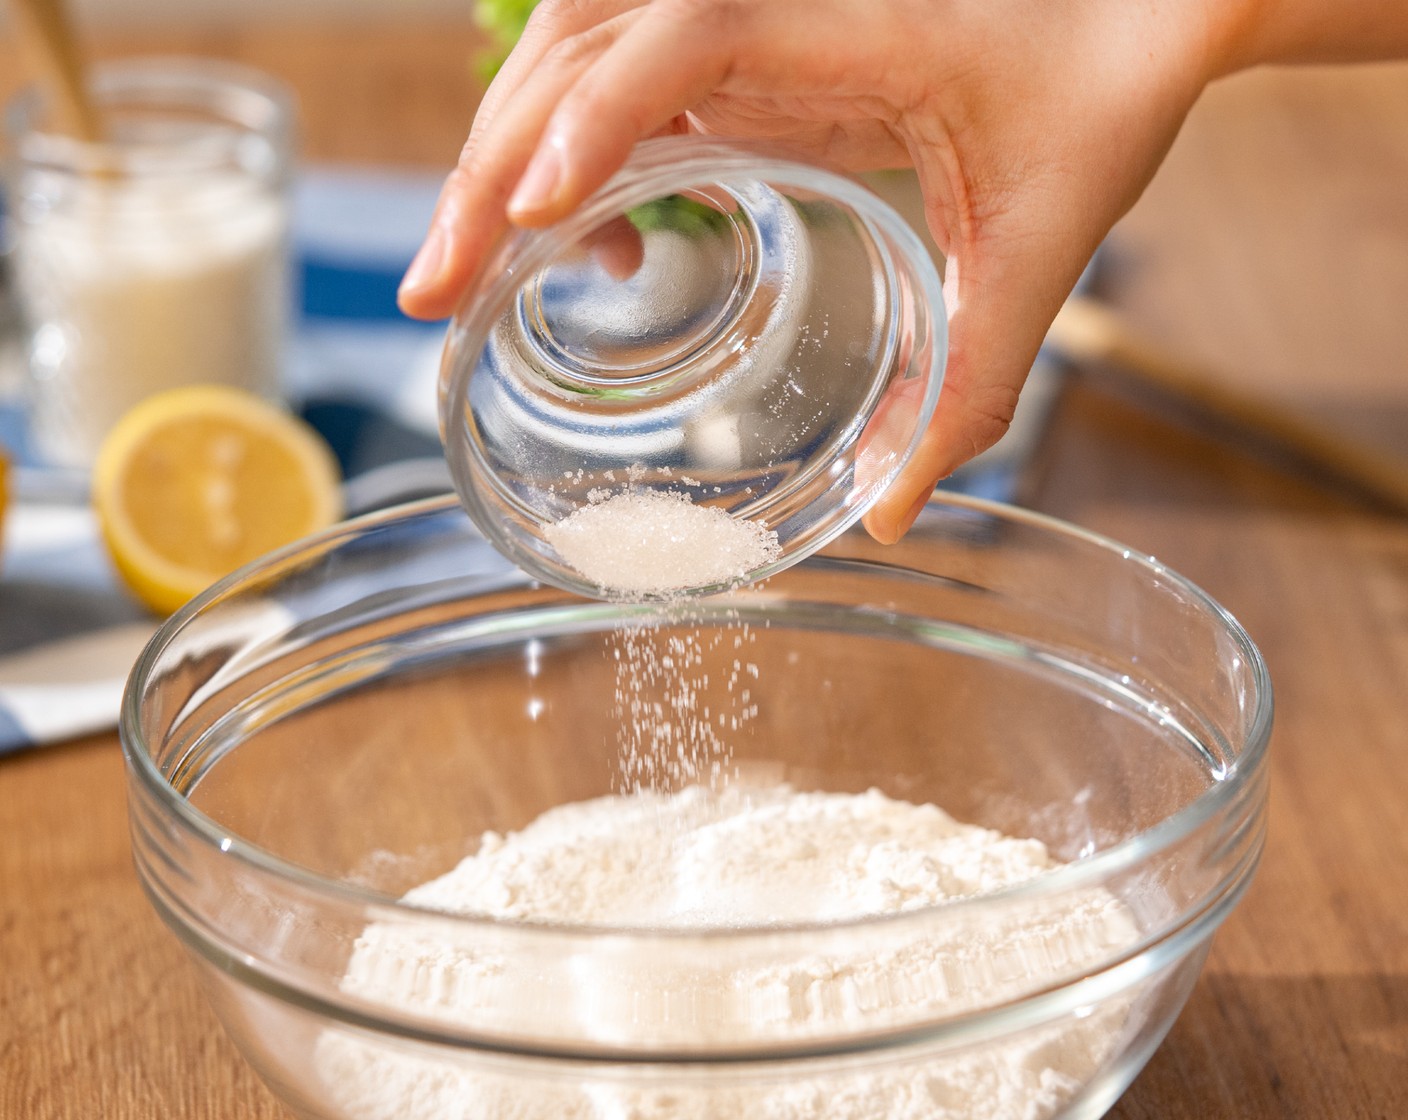 step 1 In a large bowl, combine All-Purpose Flour (1 1/2 cups), Granulated Sugar (1 Tbsp), and Salt (1/2 tsp).